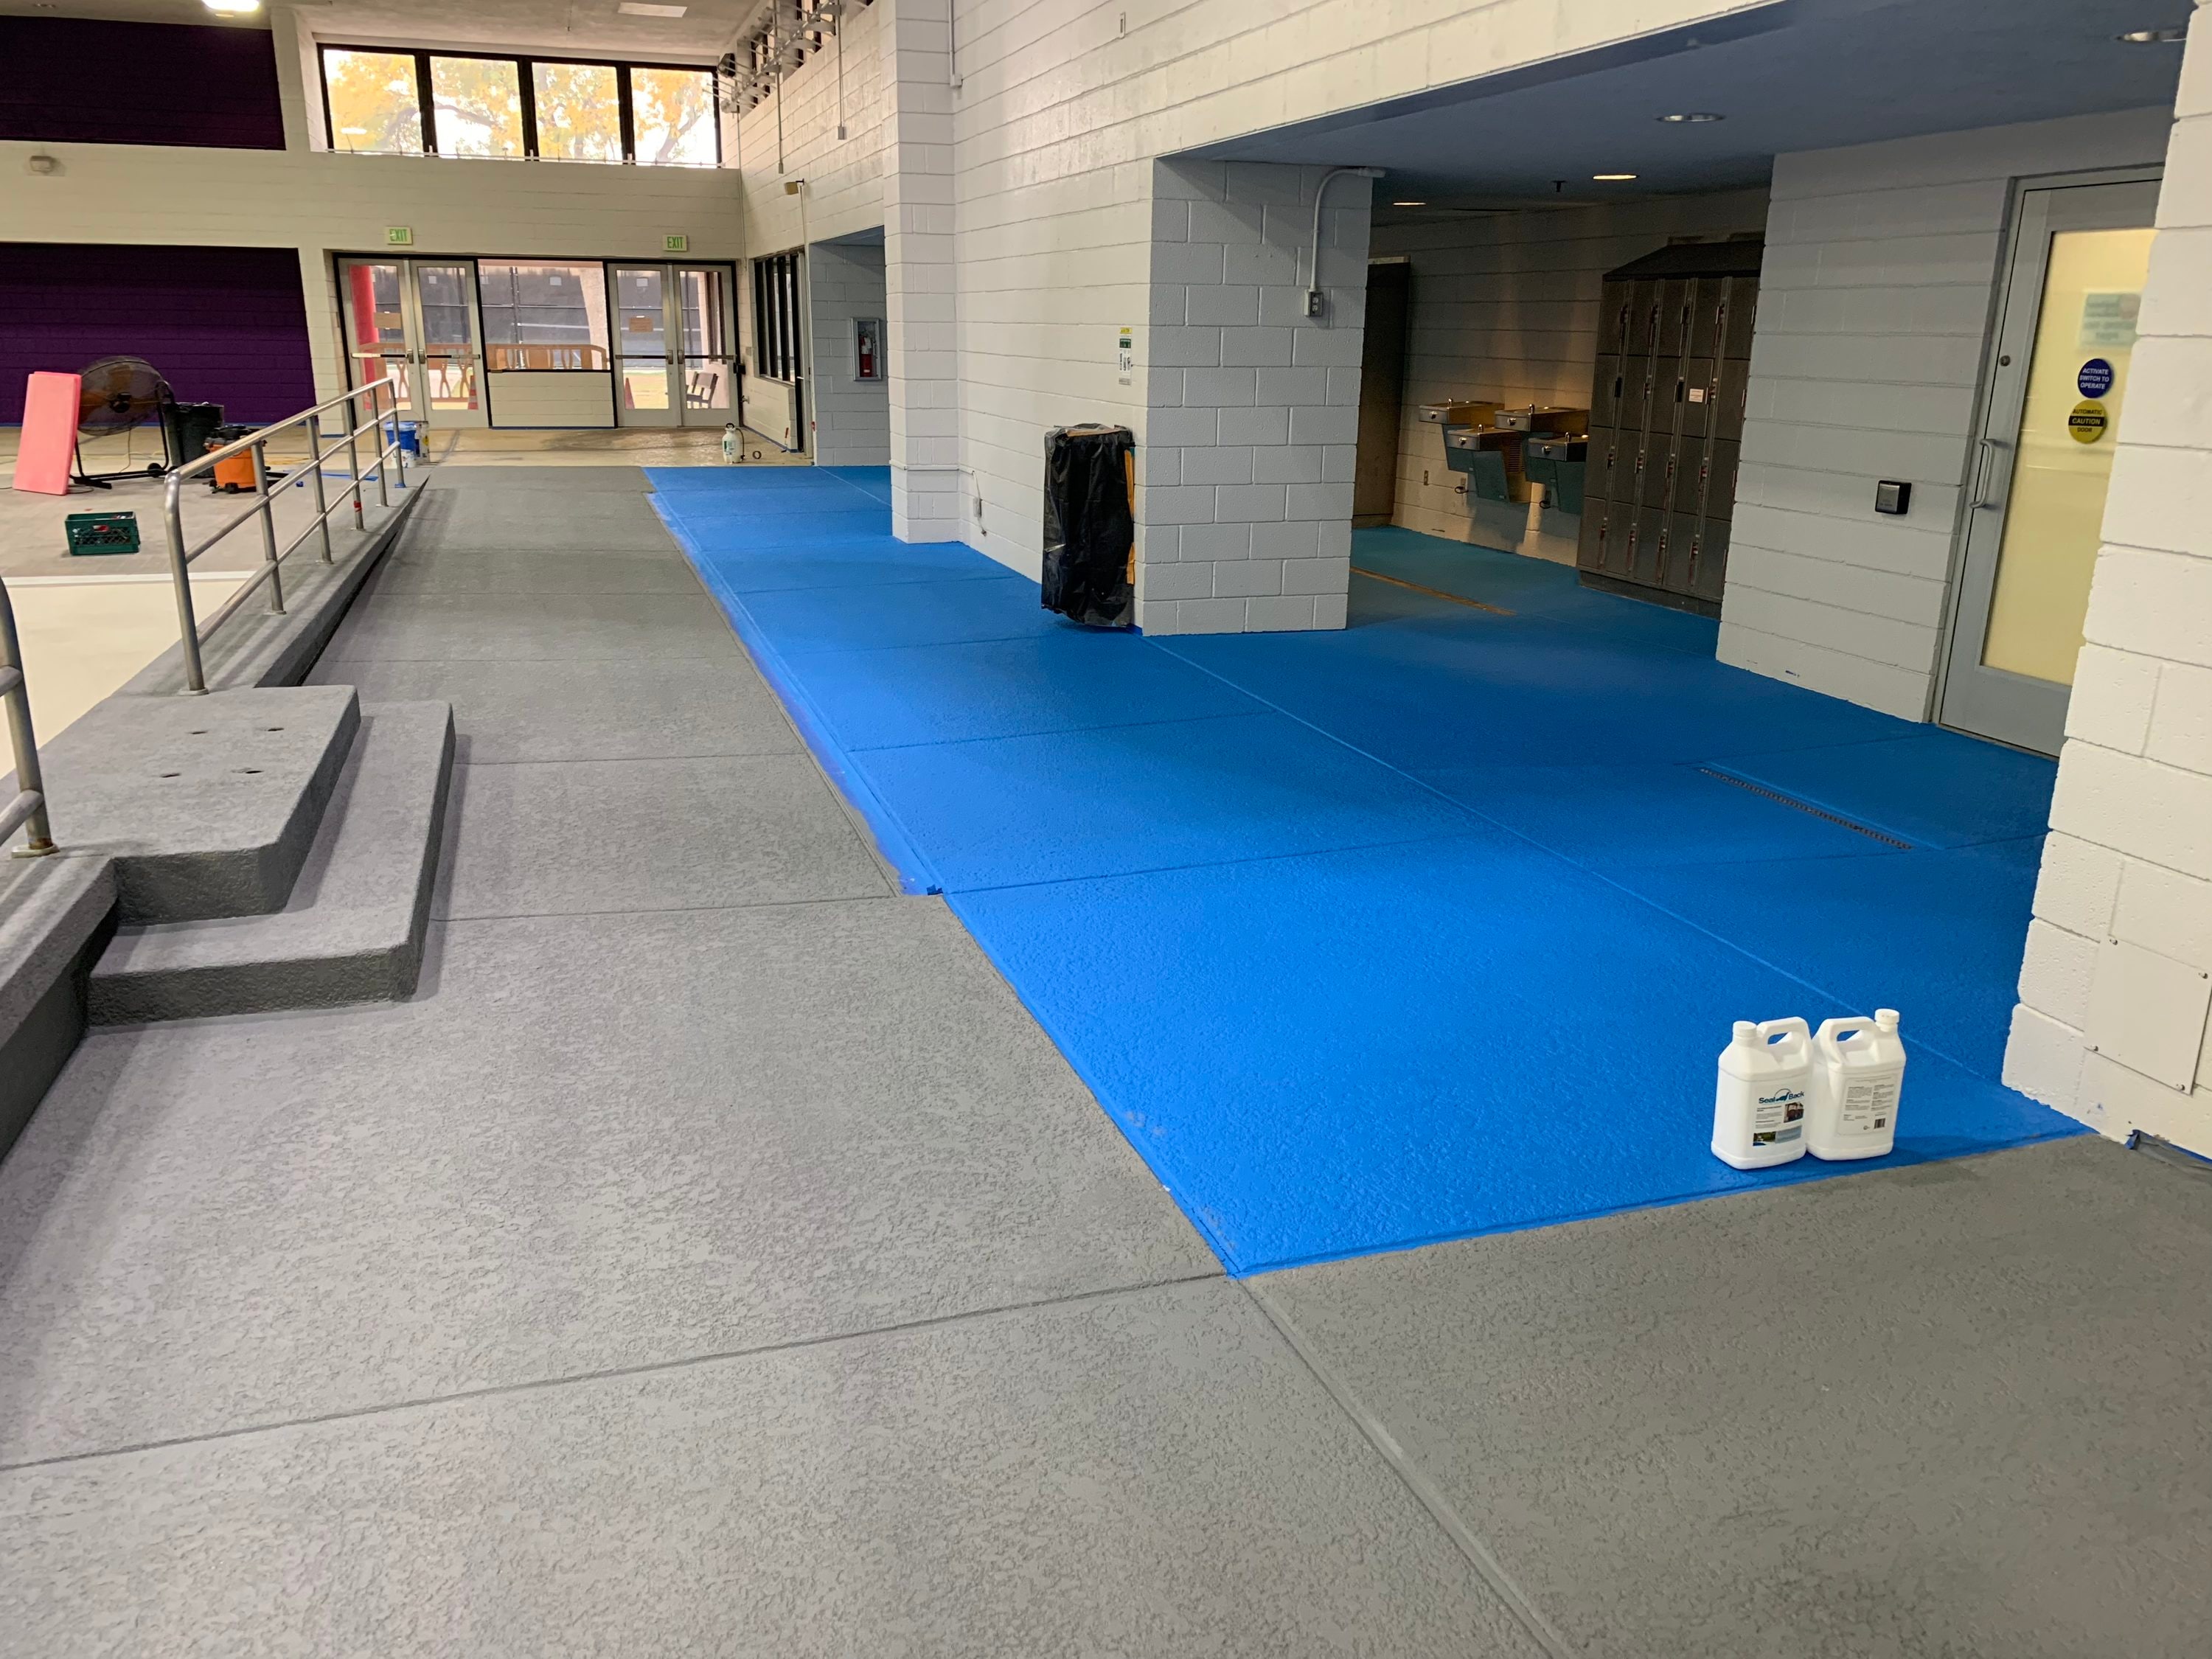 IncStores Rubber Floor Finish & Sealer | Waxy Top Coating for Wet Glossy  Looking Rubber Floor Mats Under Workout Equipment in Your Home or  Commercial